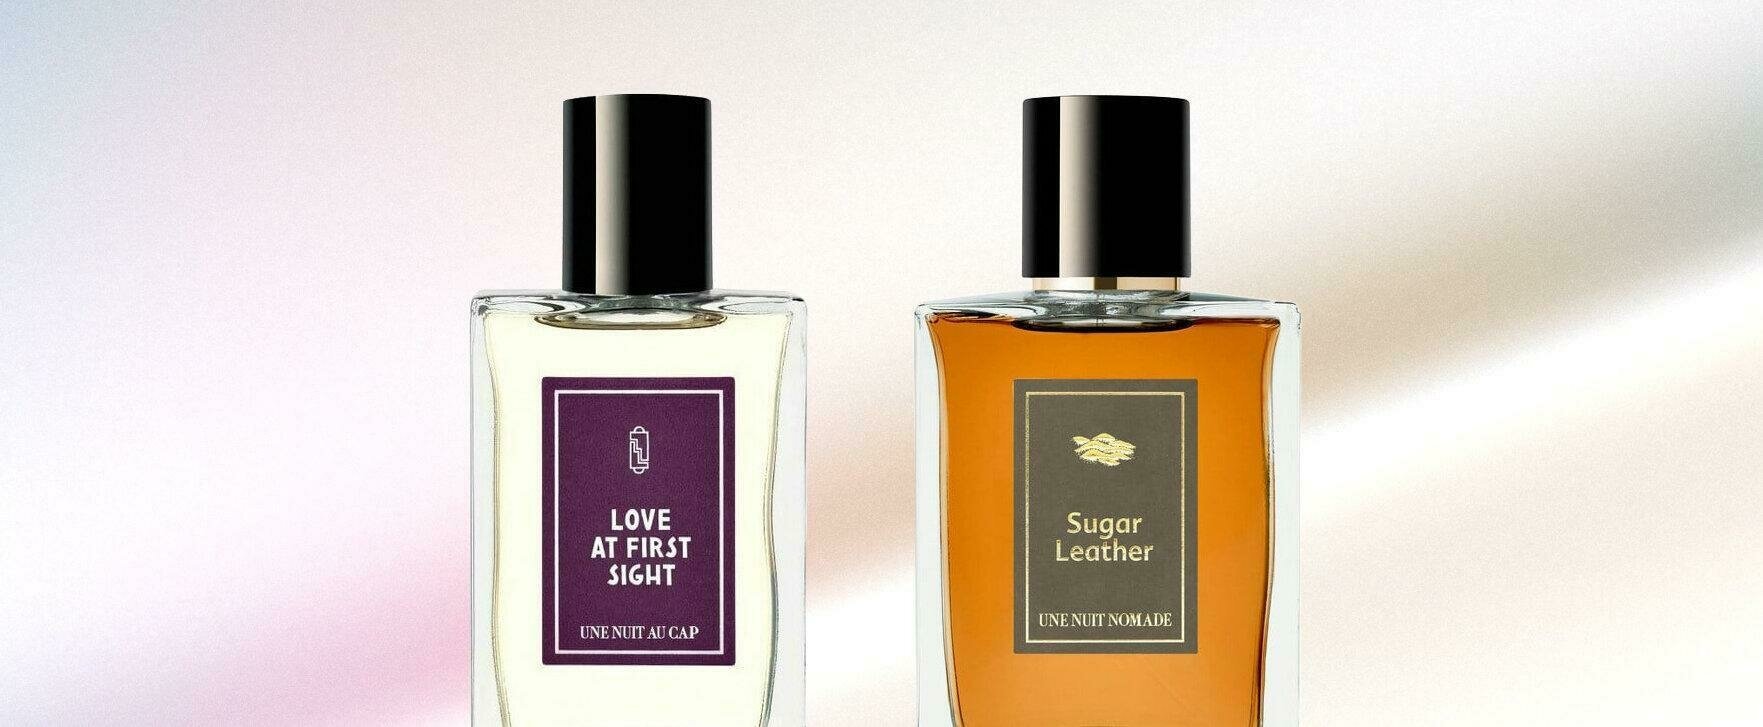 The New Unisex Fragrances From Une Nuit Nomade: "Une Nuit au Cap - Love at First Sight" and "Une Nuit à Oman - Sugar Leather" 